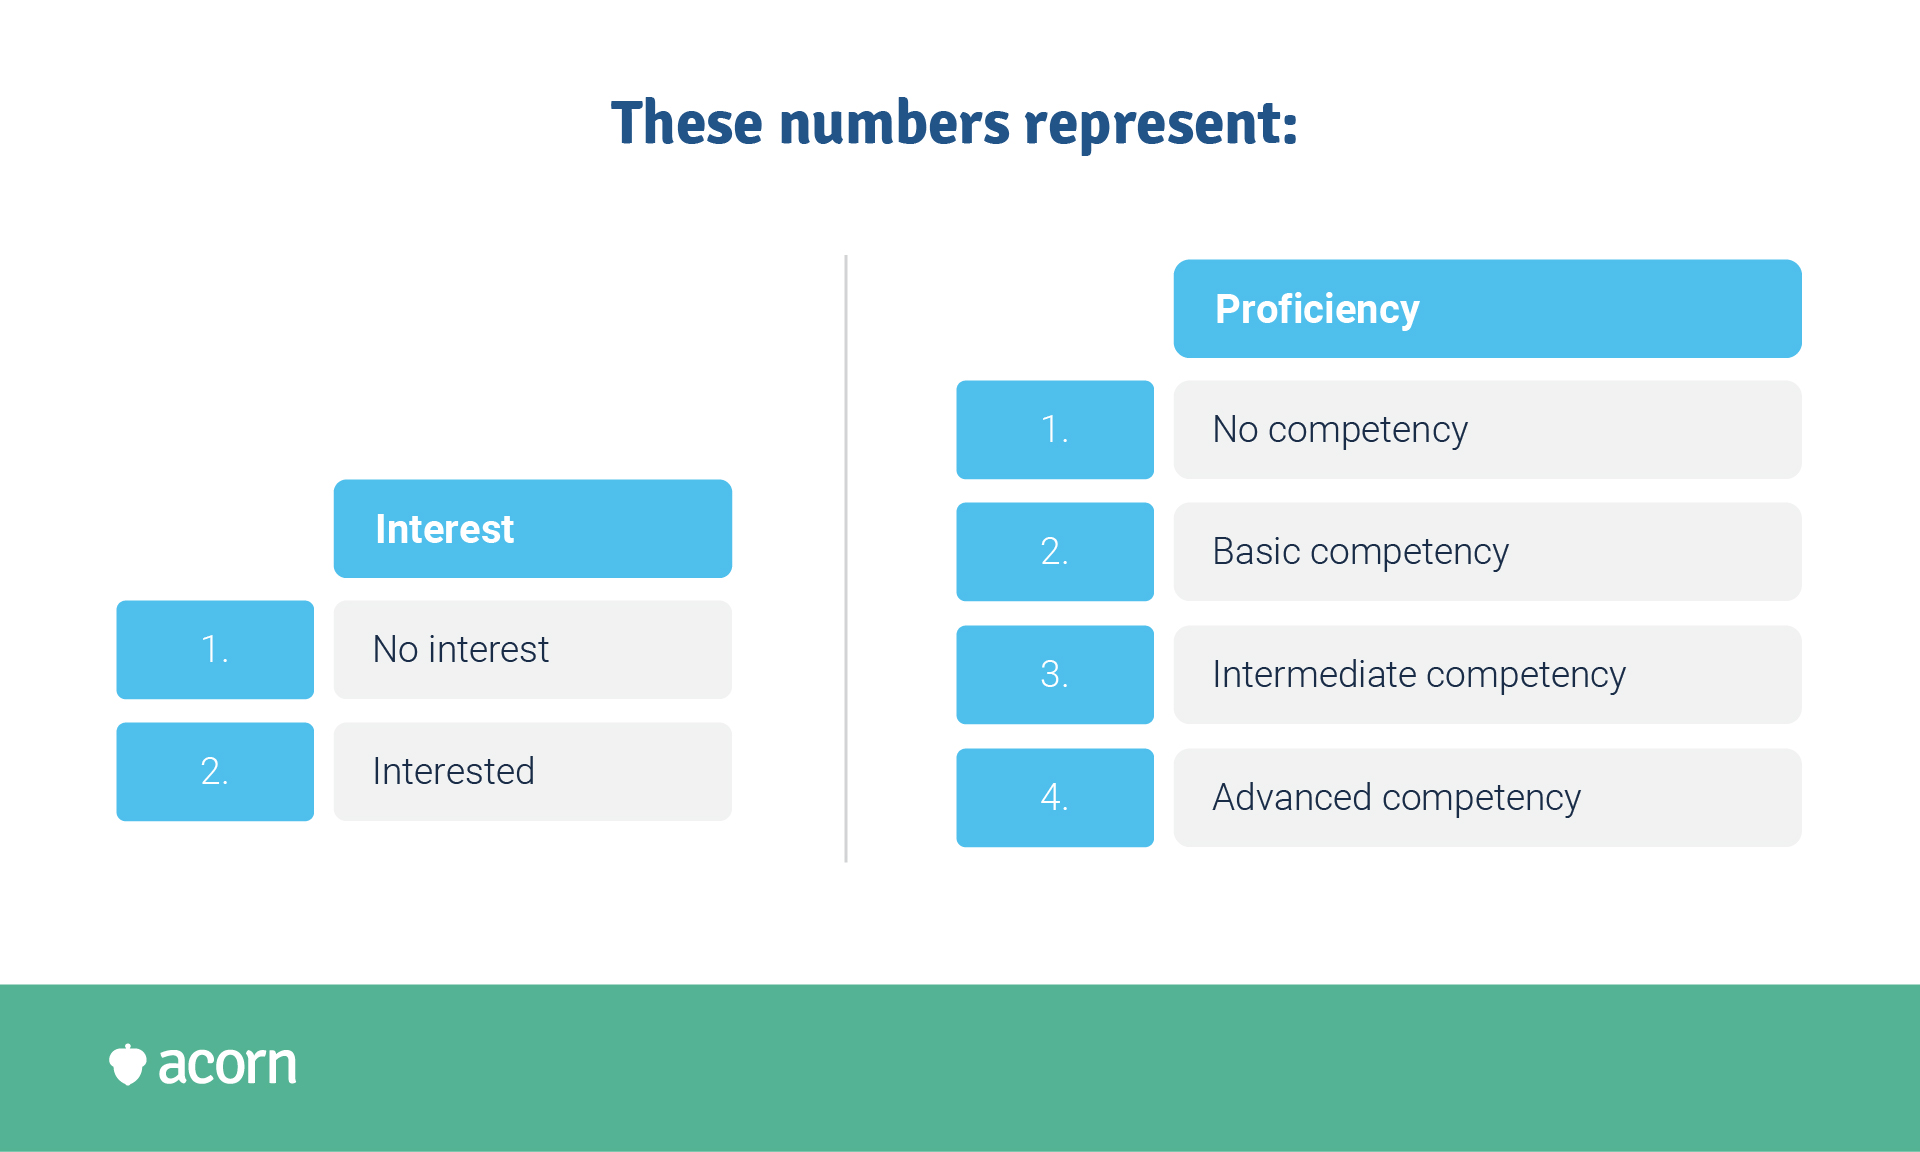 What do proficiency and interest scores in a skills matrix represent?